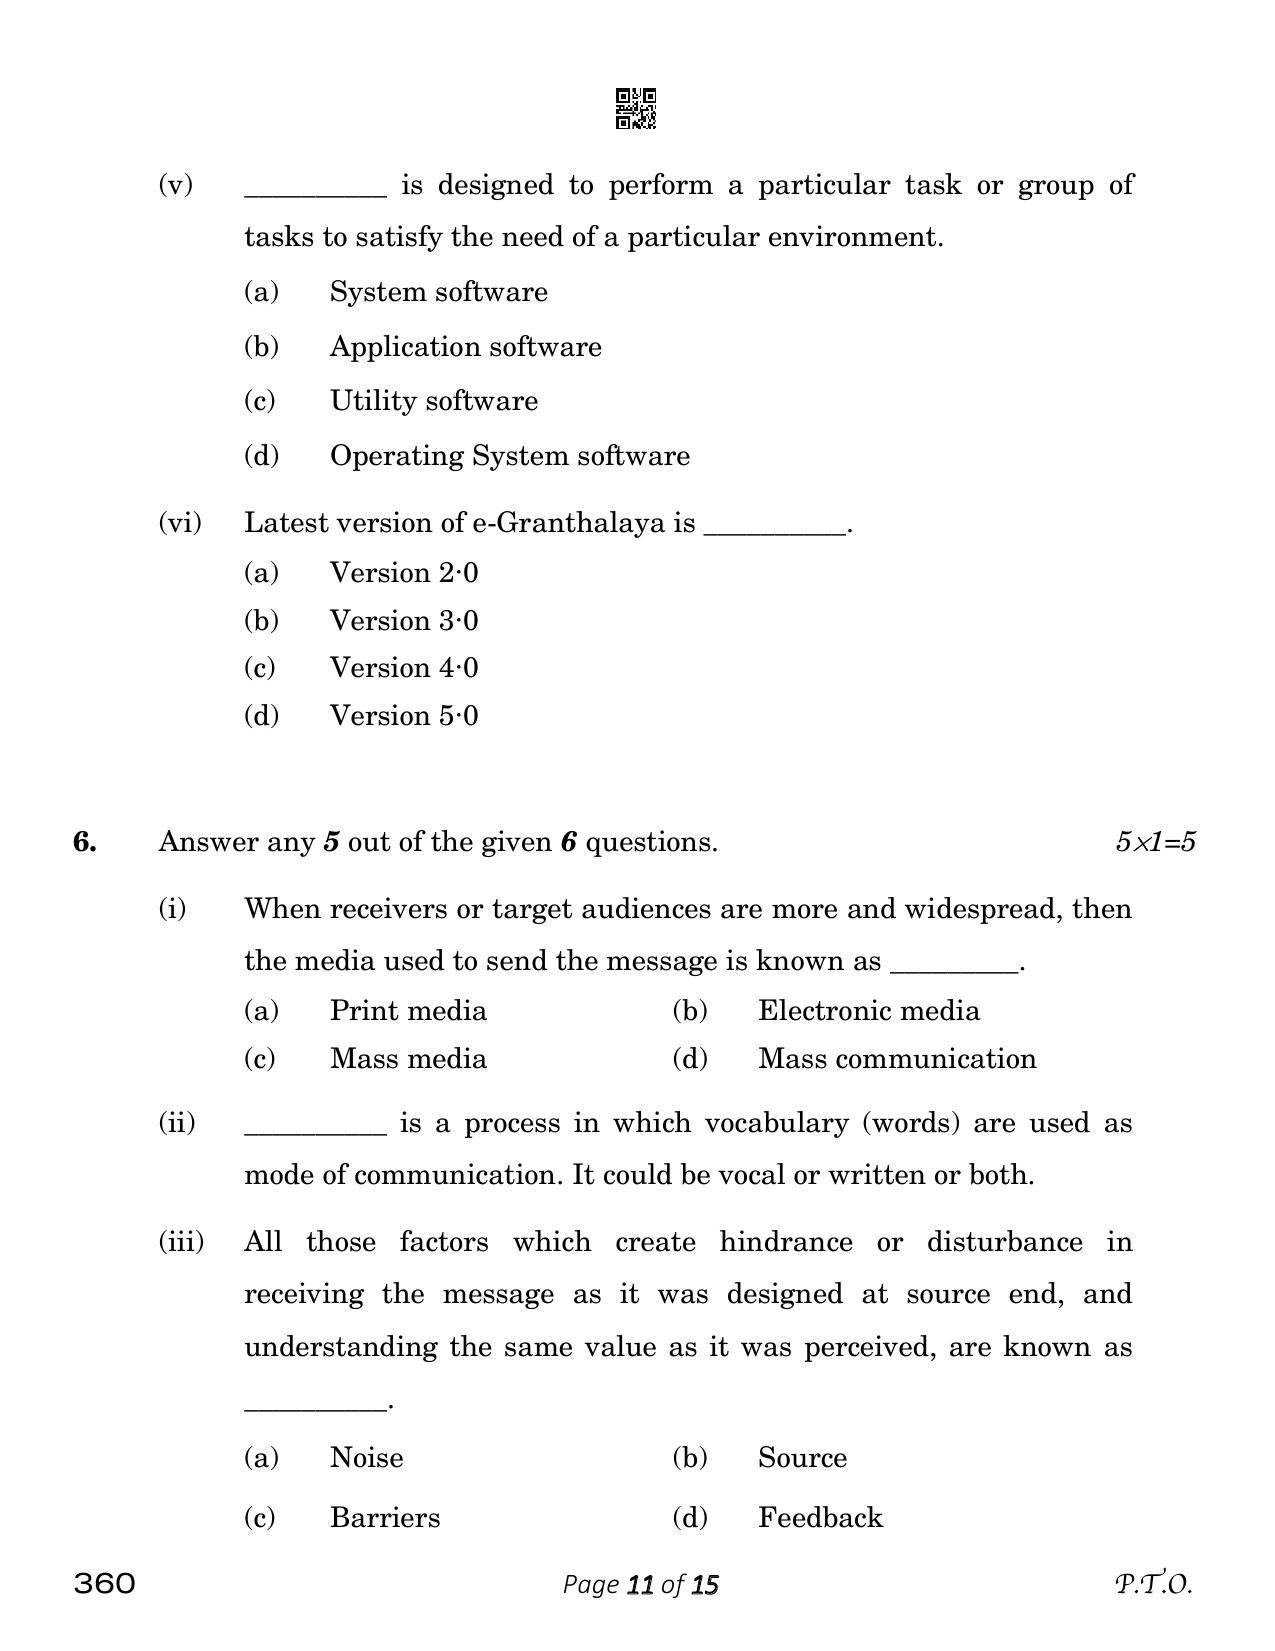 CBSE Class 12 Library And Information Science (Compartment) 2023 Question Paper - Page 11